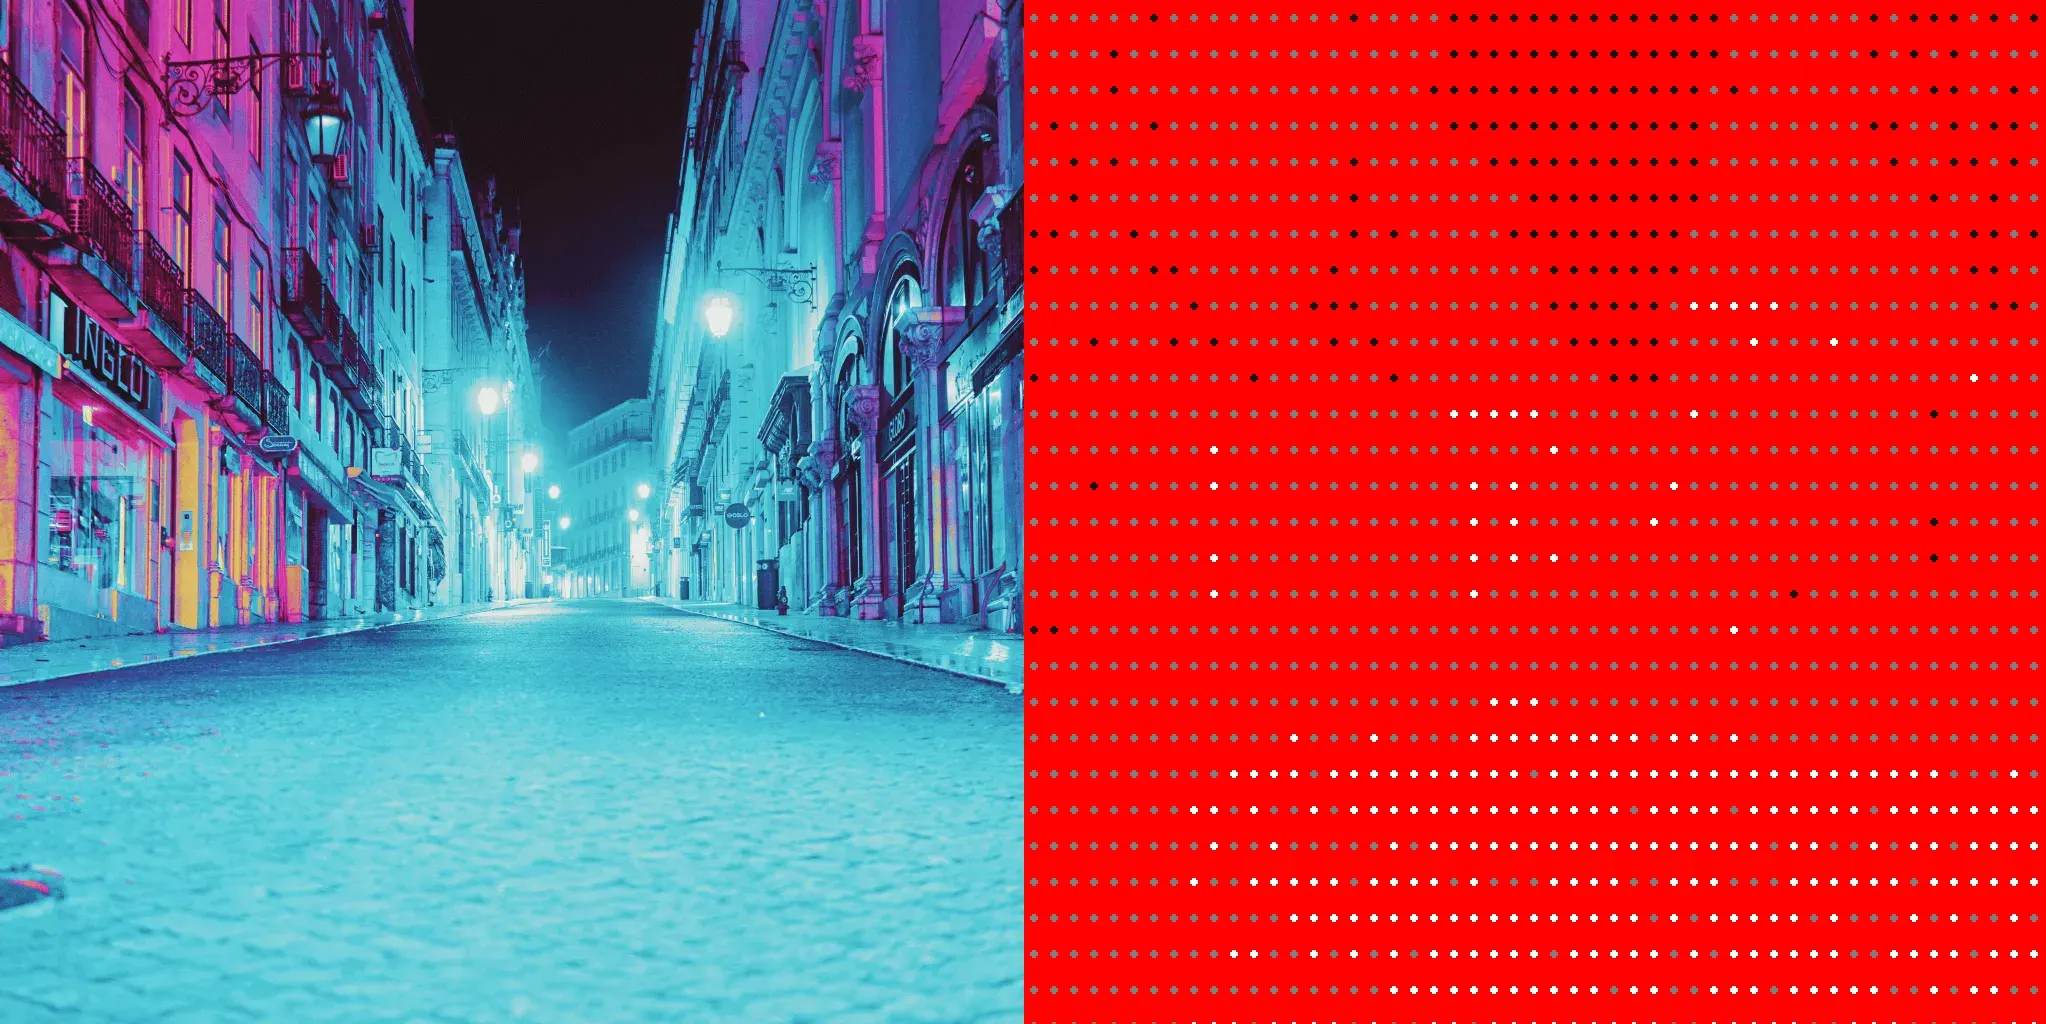 An image of a street in neon light acompanied by a red square with dots representing whether certain spots are brighter or darker than the median pixel value.